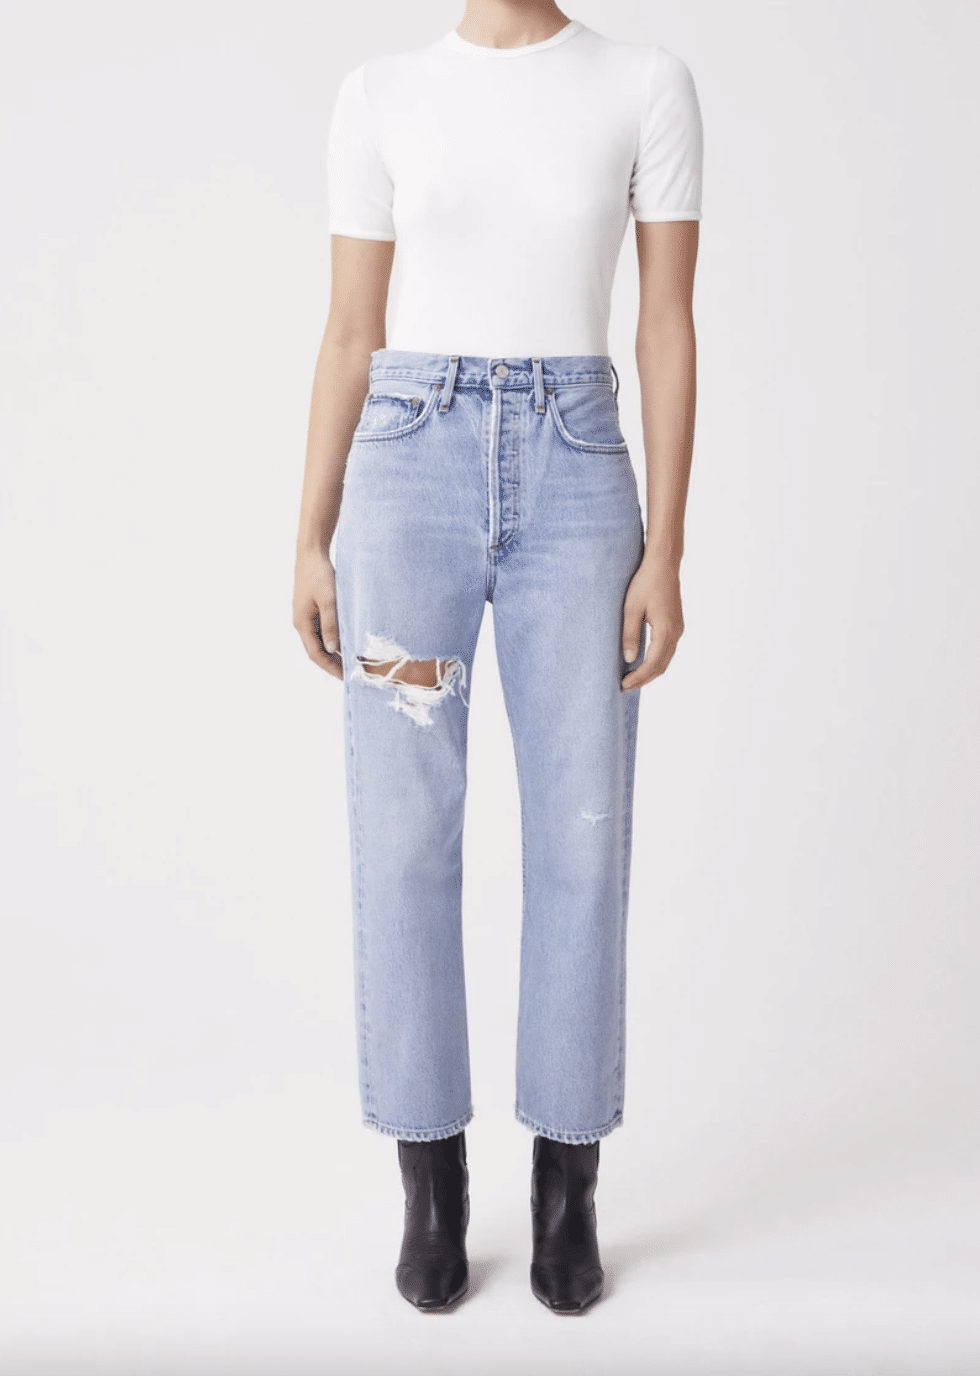 Agolde jeans, by Blogger What The Fab